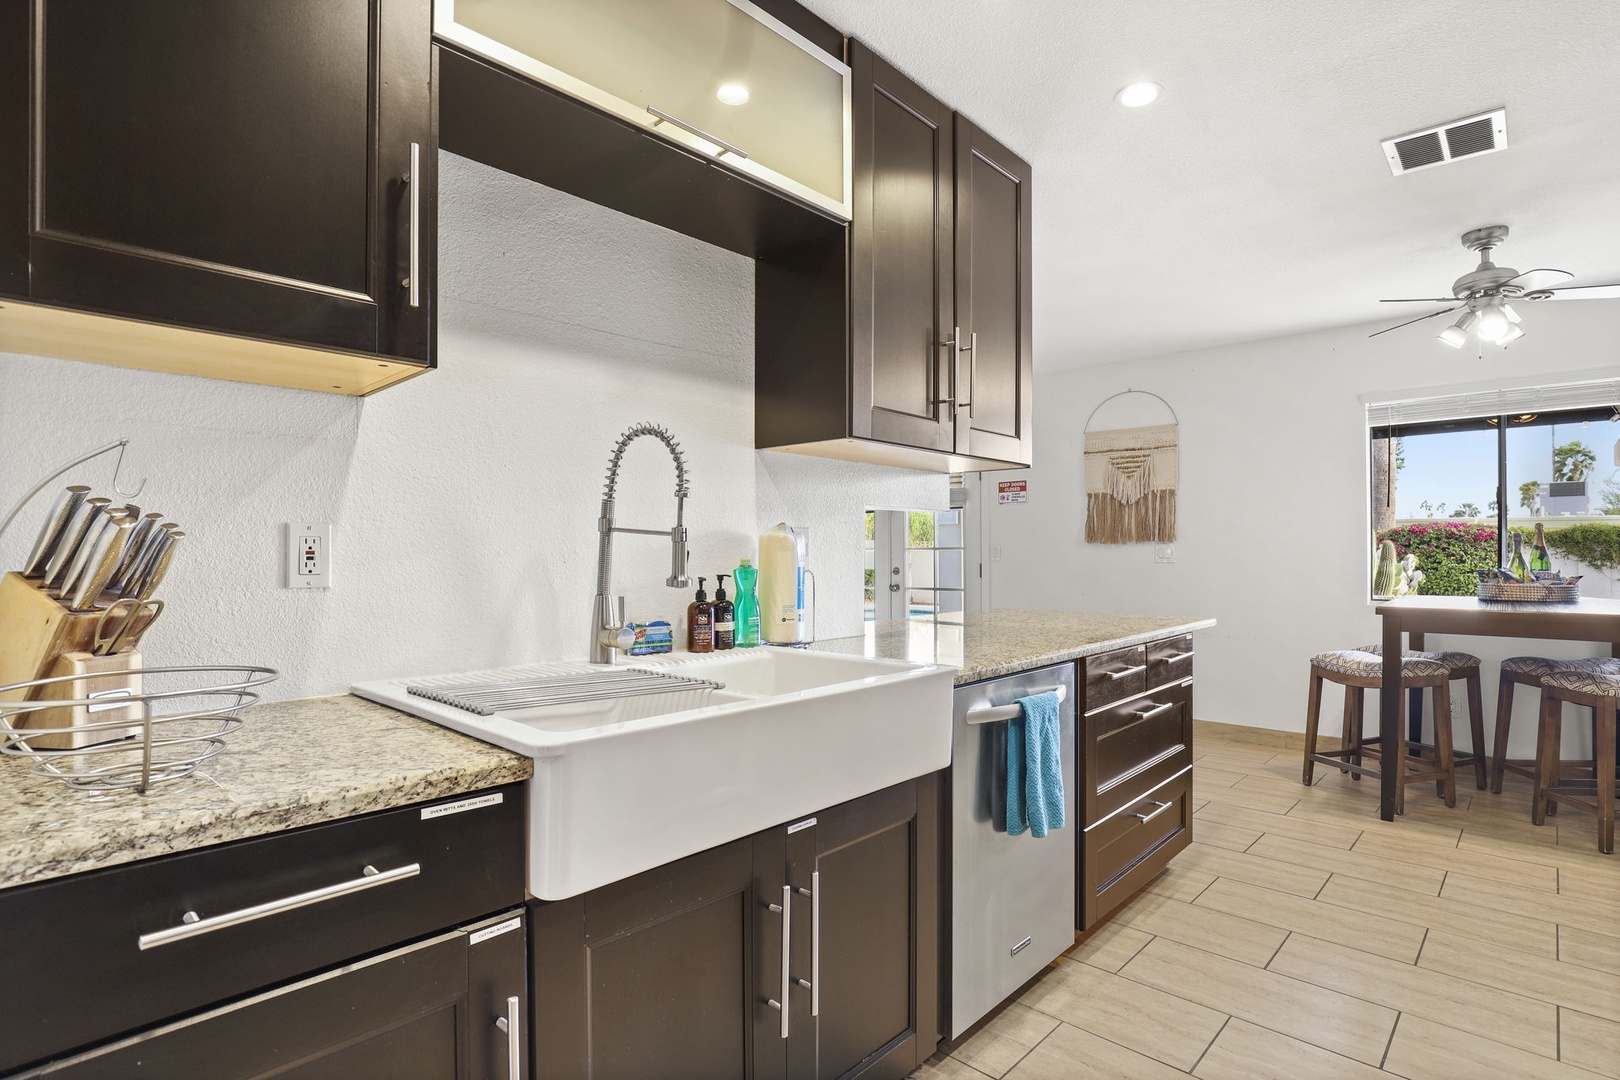 Modern kitchen outfitted with stainless steel appliances and everything you need to cook up all your favorites - Pots, Pans, Utensils, Spice Rack, Toaster, Kettle, Blender, Drip Coffee Maker, Filtered Water, Ice Maker.